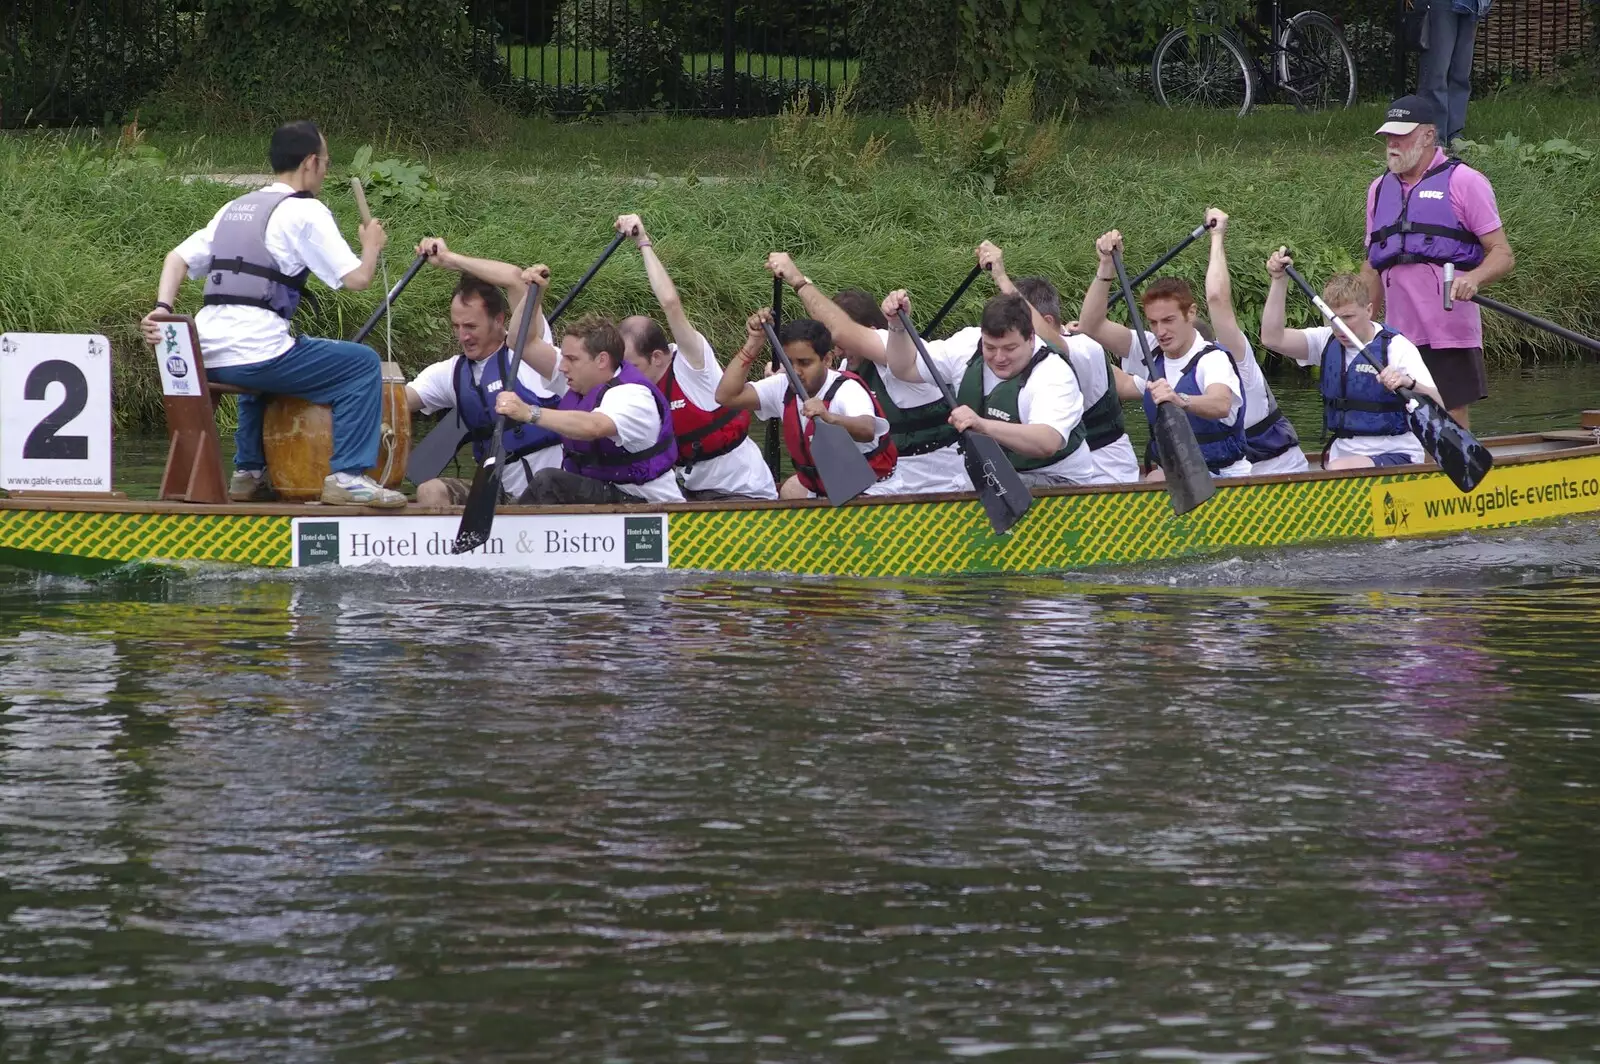 Team Qualcomm heads up to the start, from Qualcomm's Dragon-Boat Racing, Fen Ditton, Cambridge - 8th September 2007